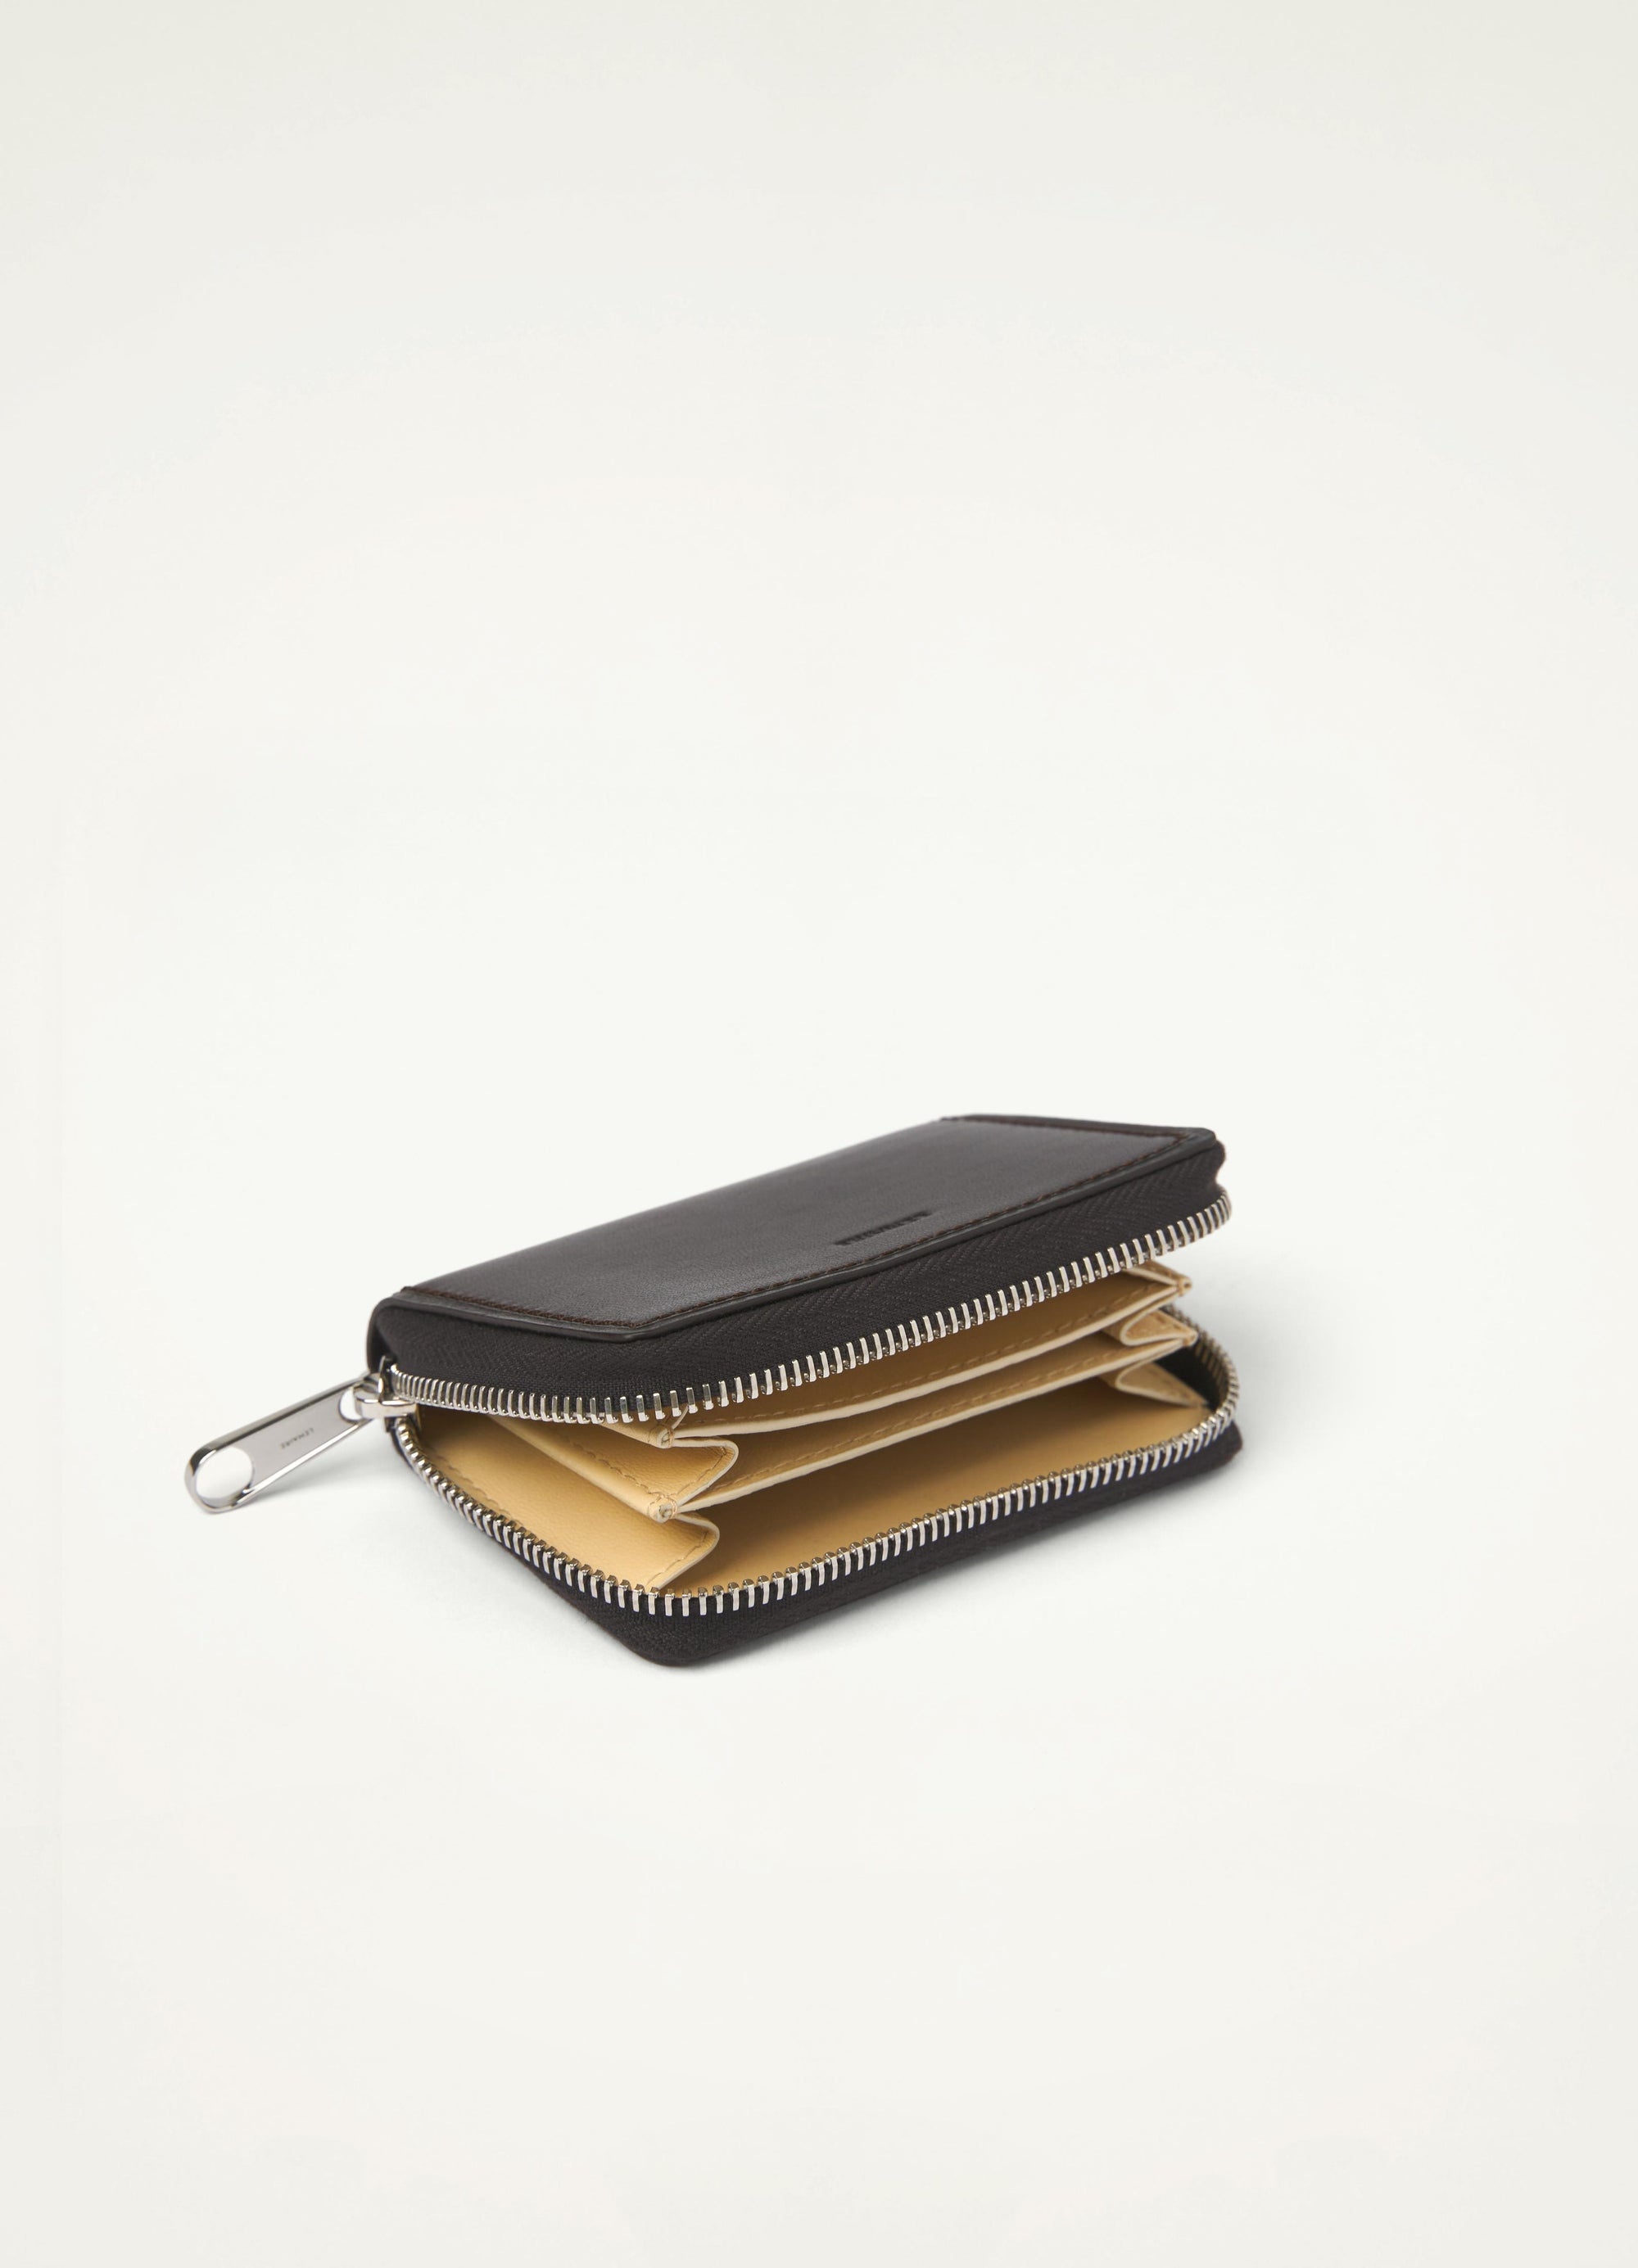 ZIP WALLET COMPACT
GLOSSY VEGETABLE LEATHER - 3